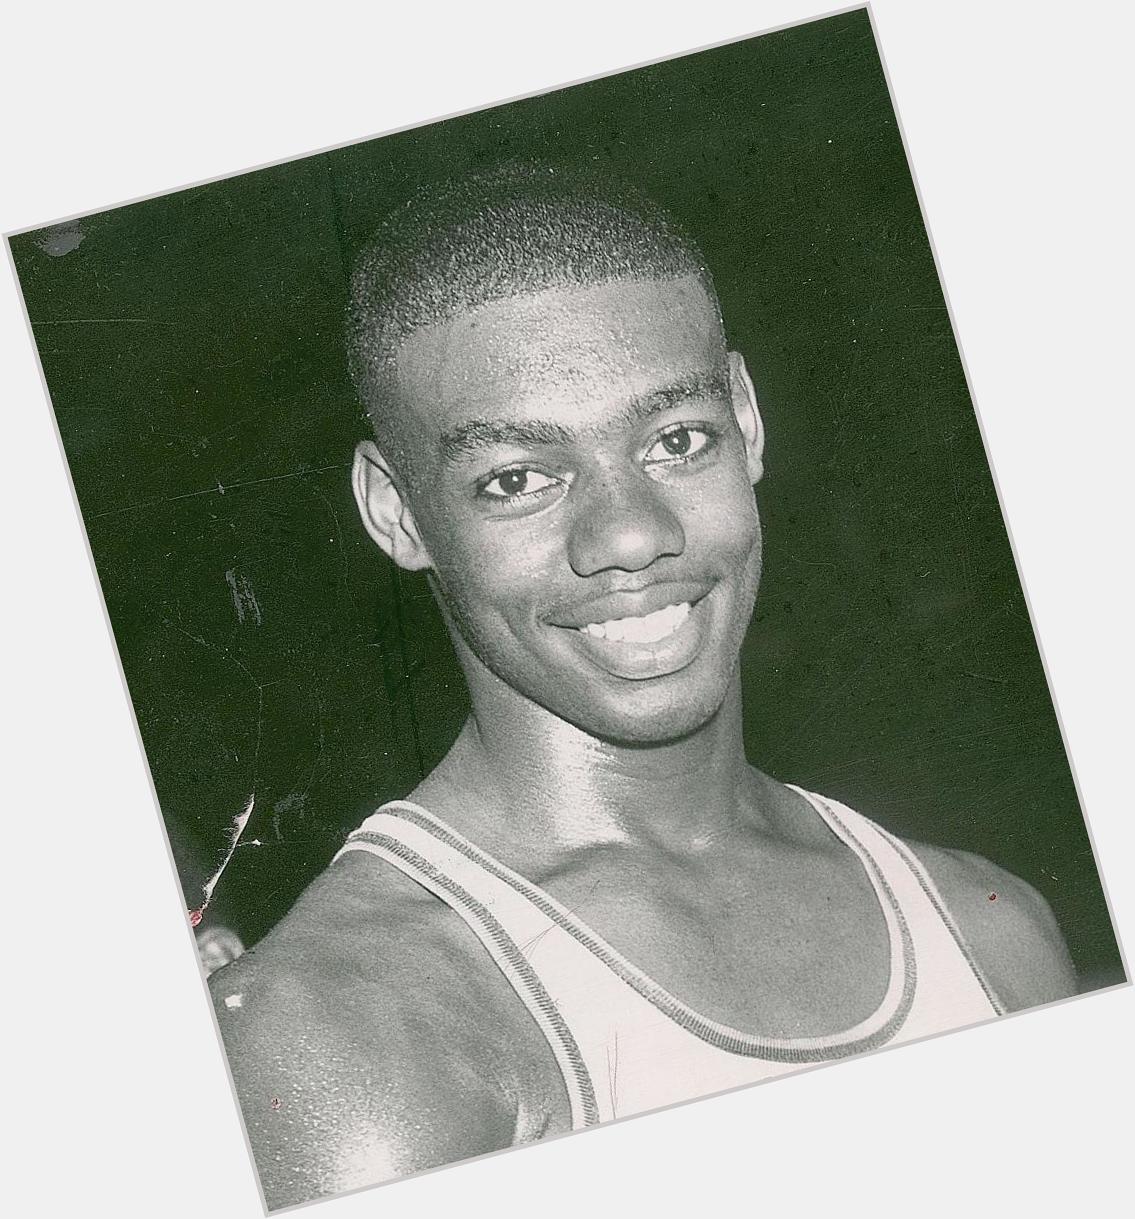 One of Indianas all-time great basketball players, Oscar Robertson, turns 76 today. Wish him a happy birthday! 